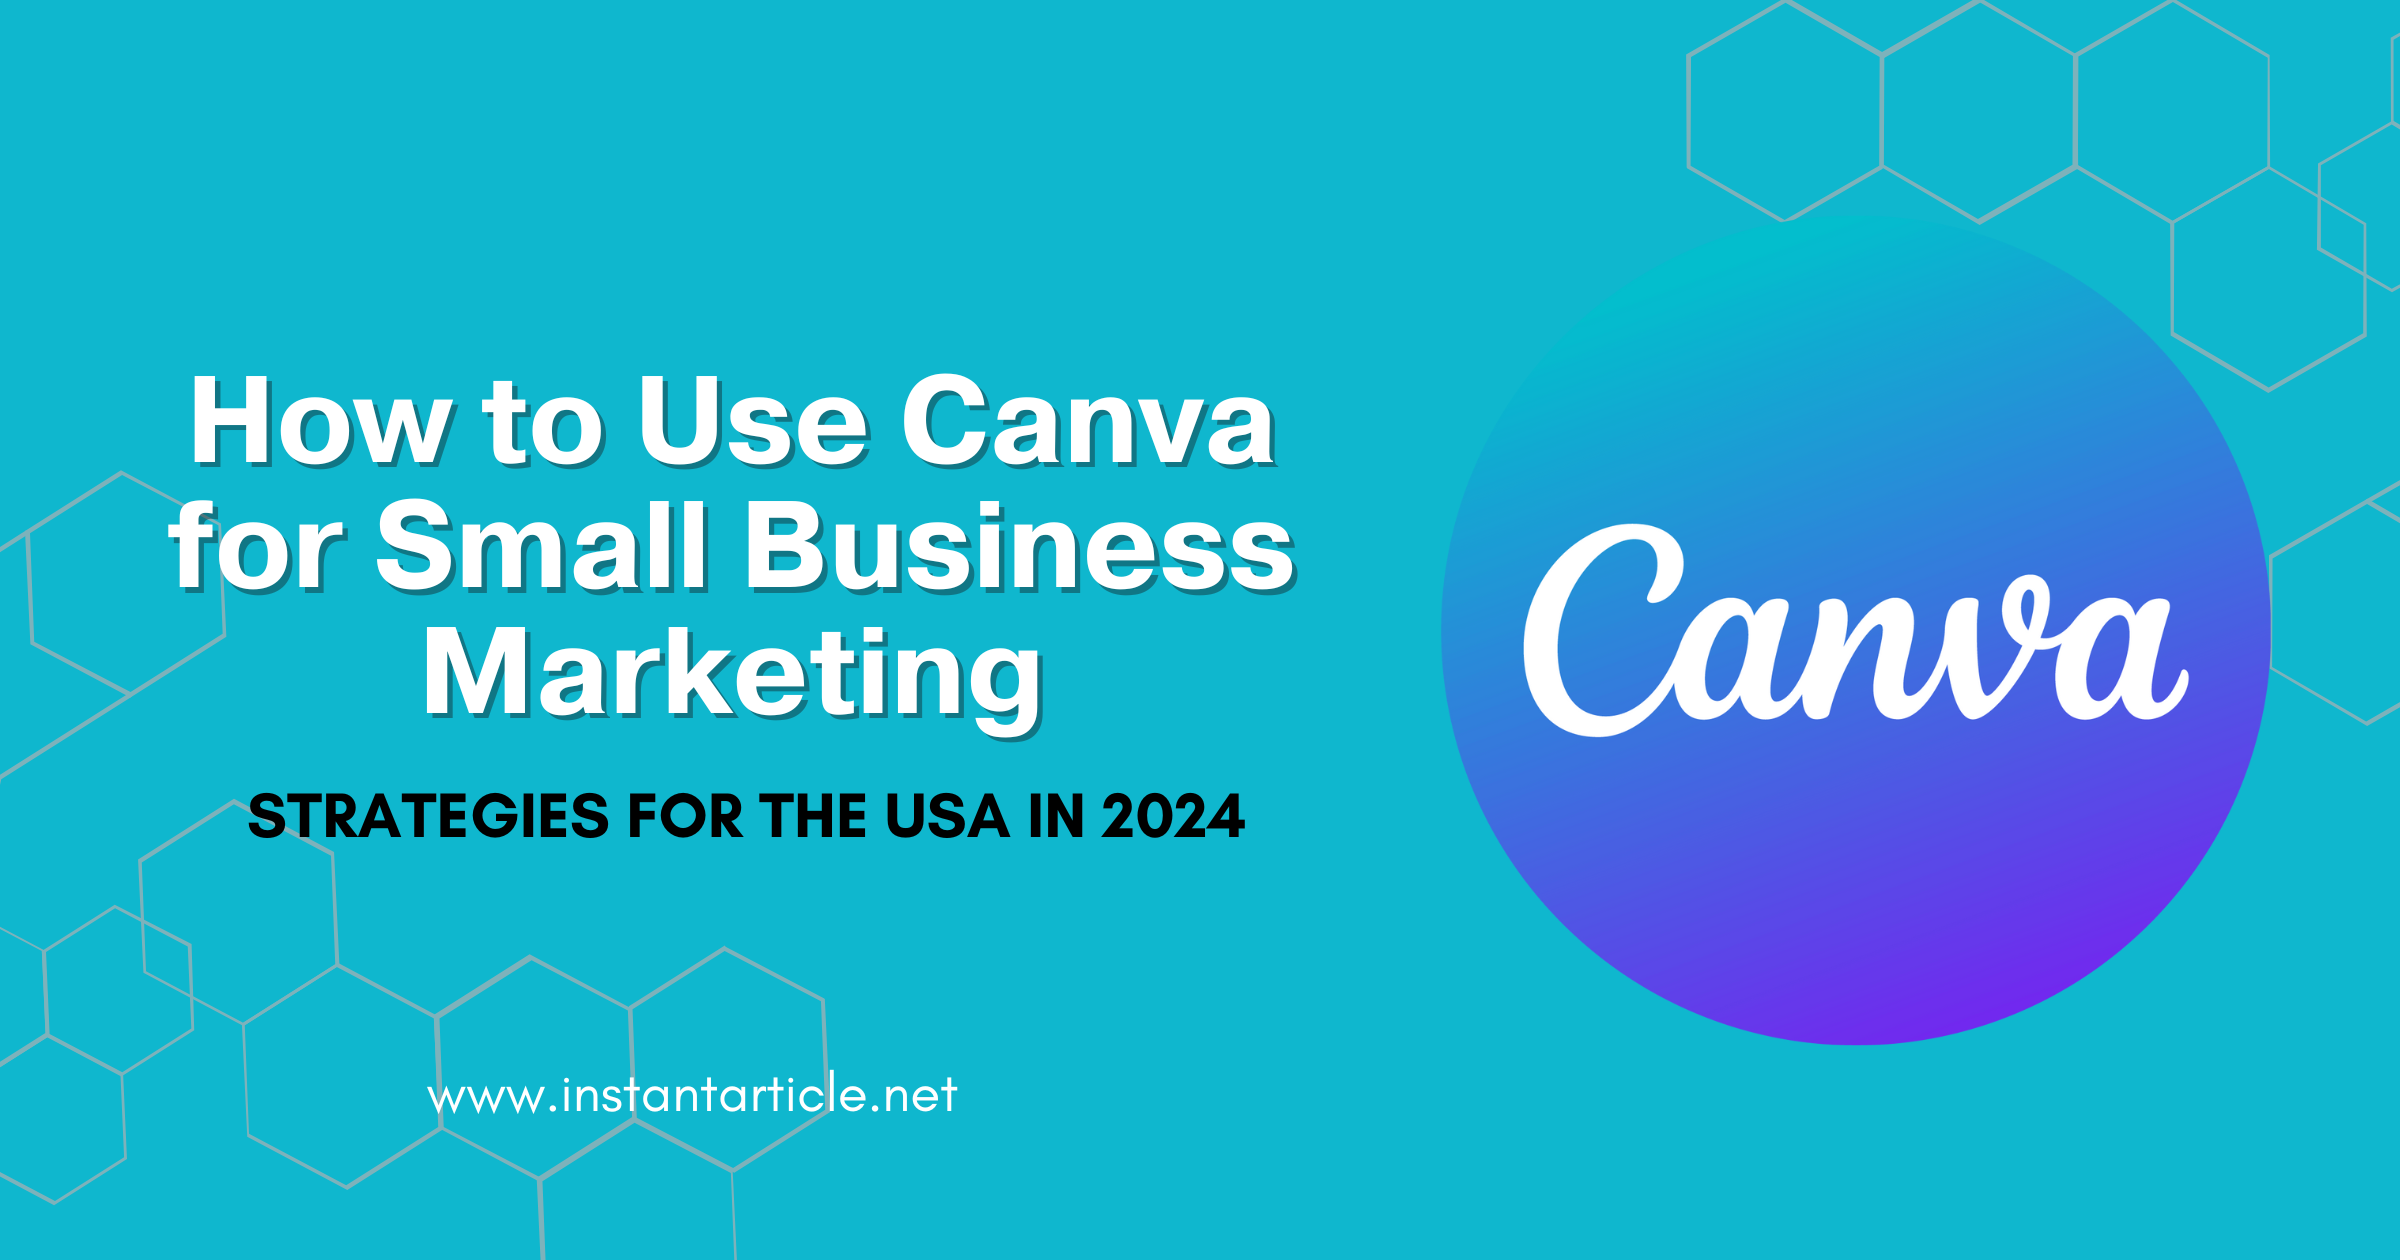 Canva for Small Business Marketing